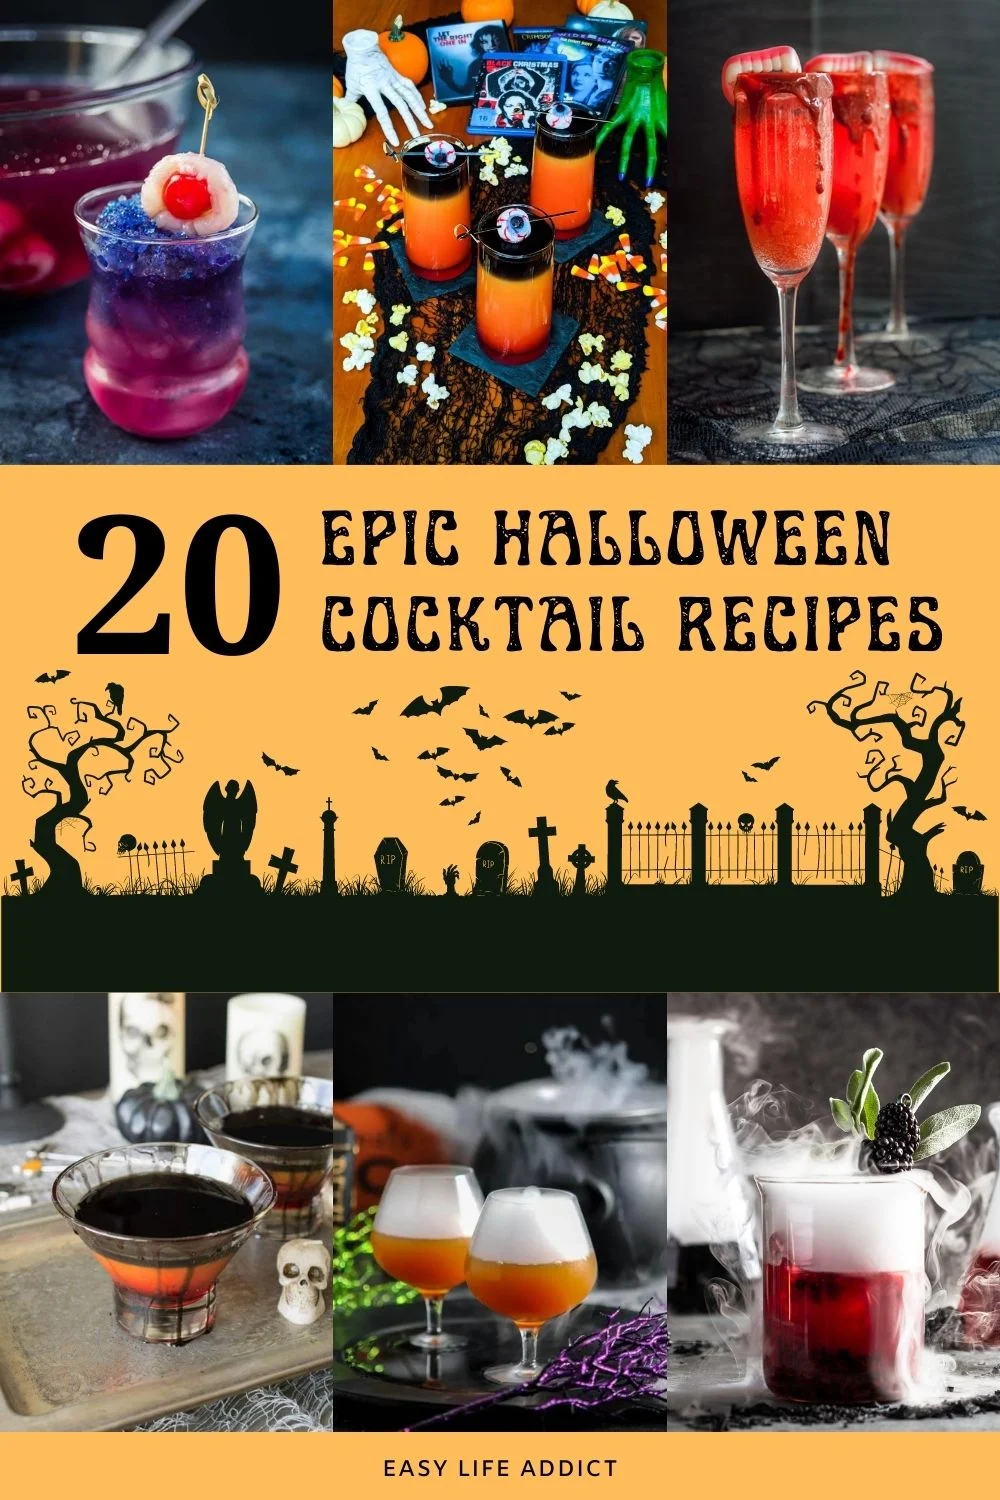 20 Epic Halloween Cocktail Recipes